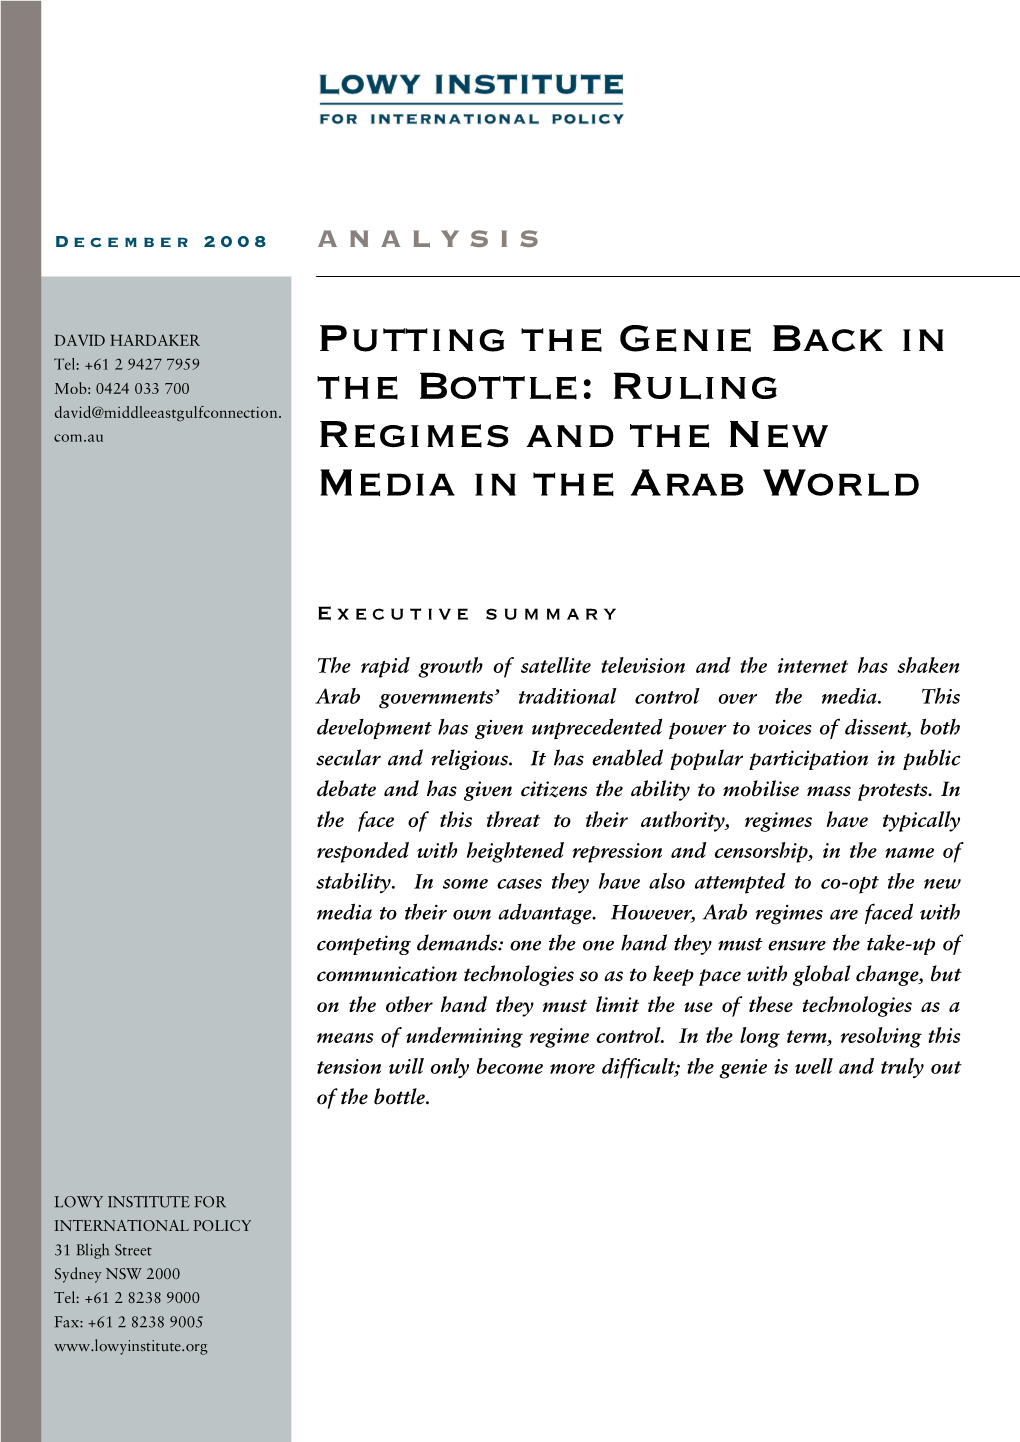 Putting the Genie Back in the Bottle: Ruling Regimes and the New Media in the Arab World